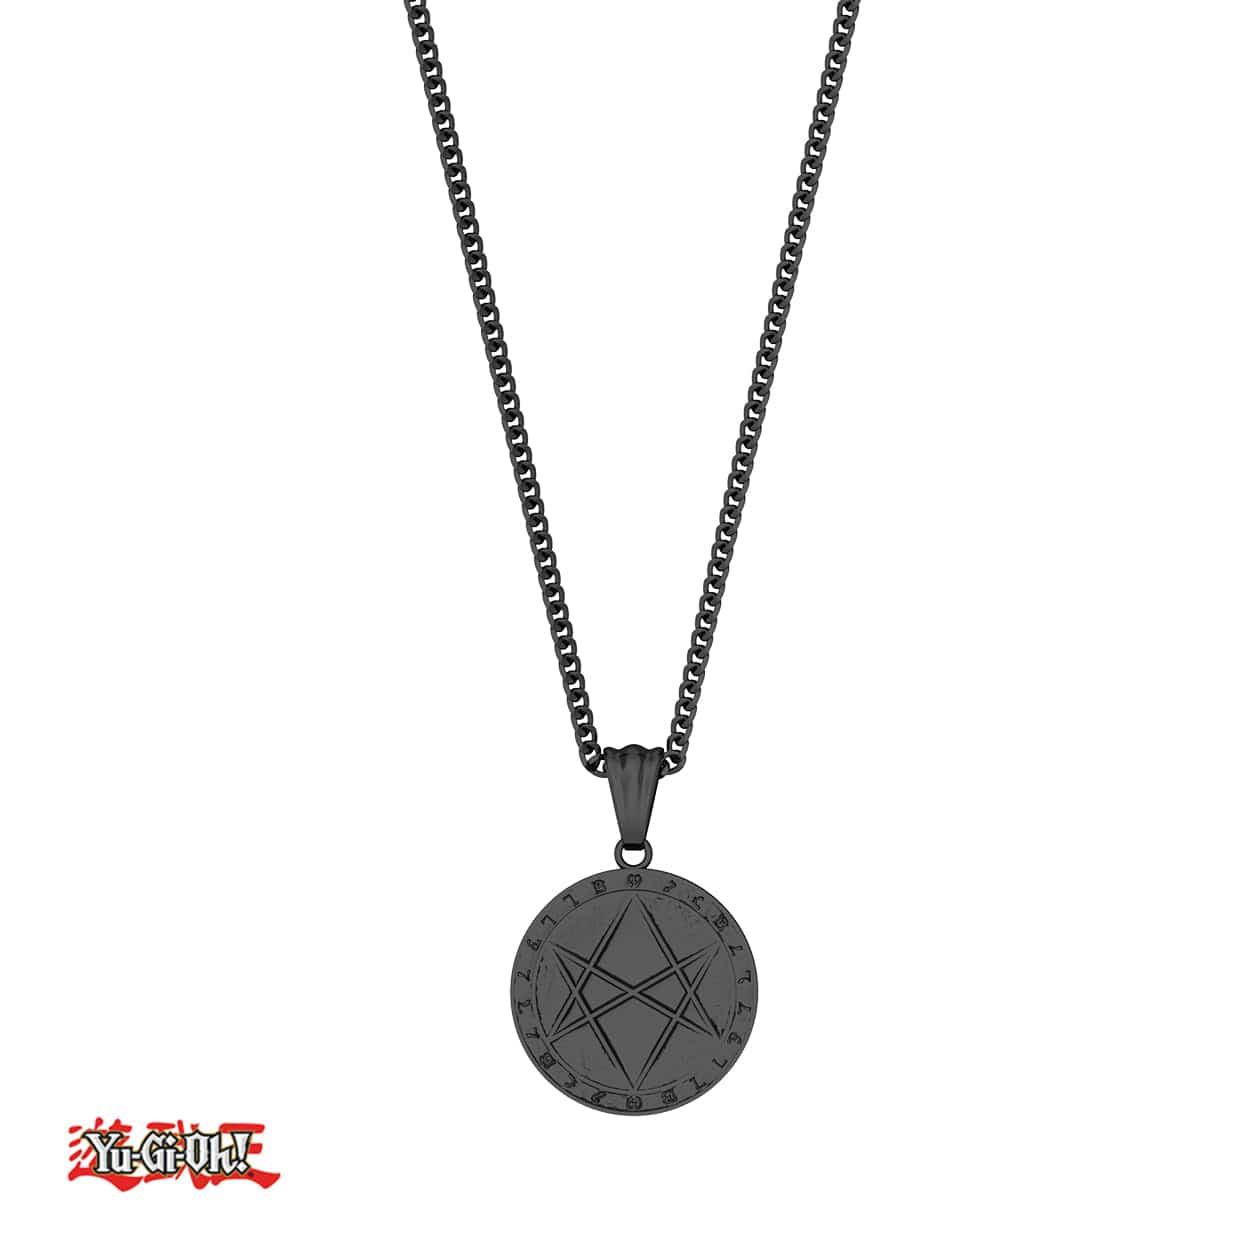 Yu-Gi-Oh!™ Seal Of Orichalcos Necklace